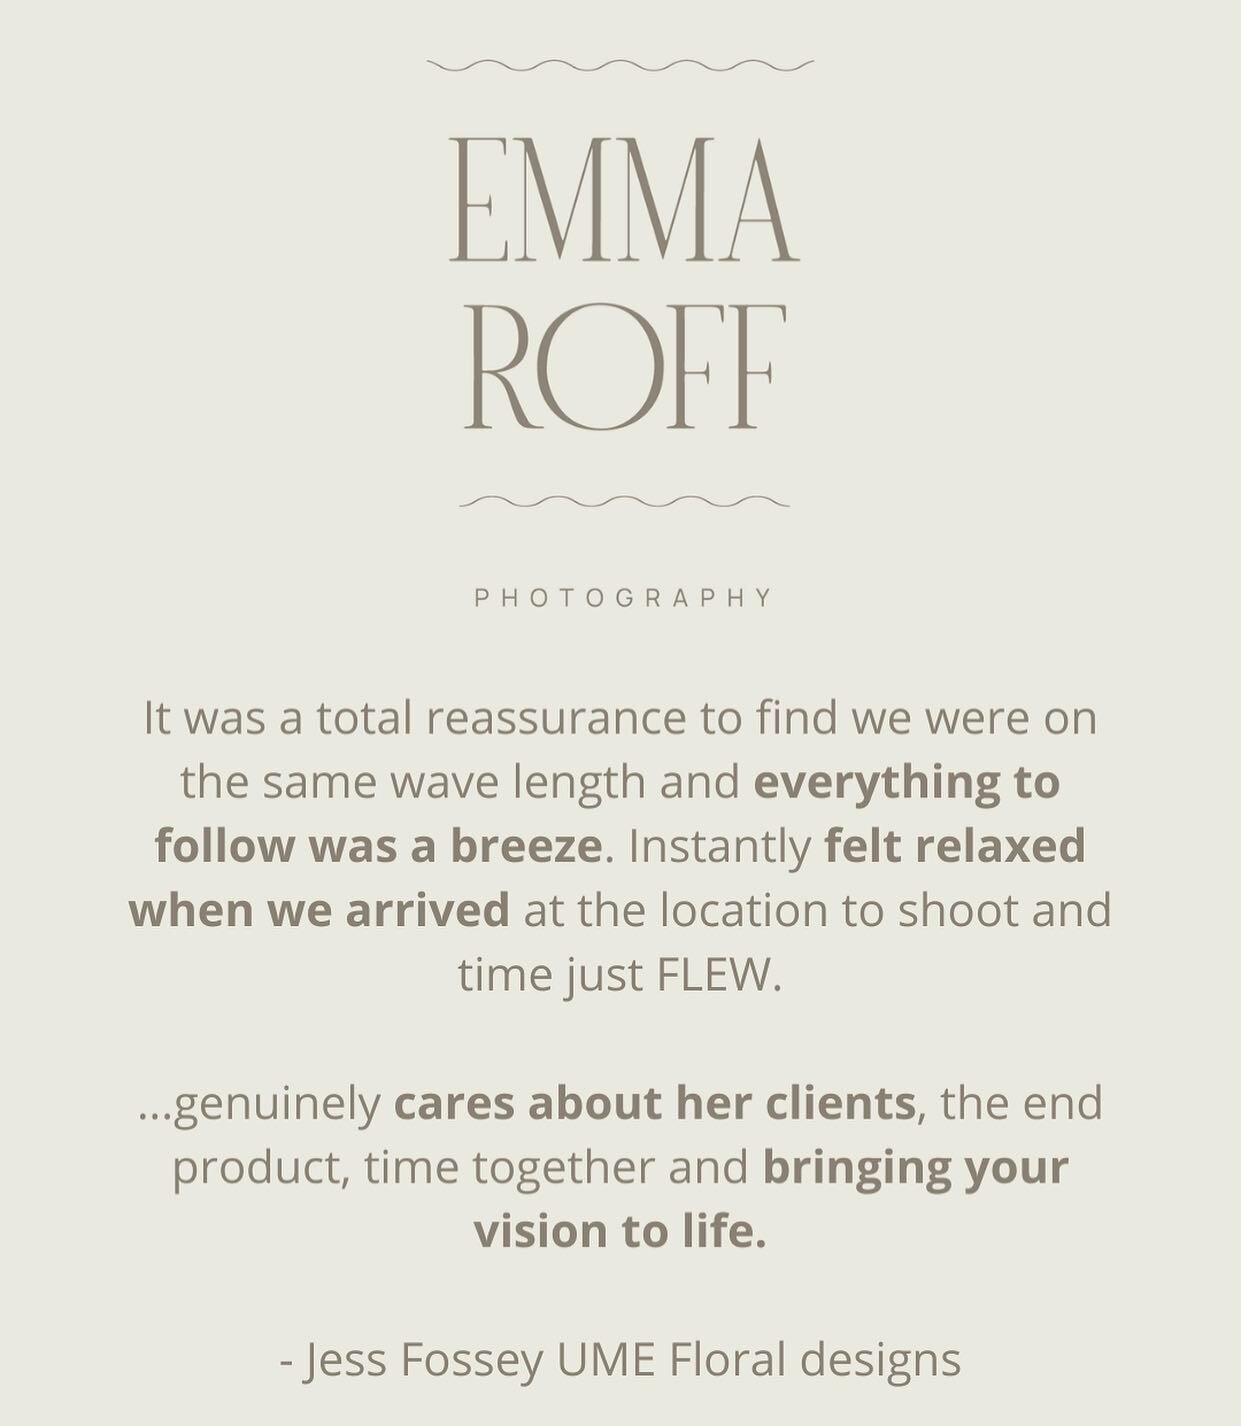 Thank you @ume.floraldesign for your lovely words! 

It&rsquo;s always amazing to work with brands who share a connection on vision and who you can work kindly &amp; honestly together!

Did you see the previous reel I made from our floral shoot for J